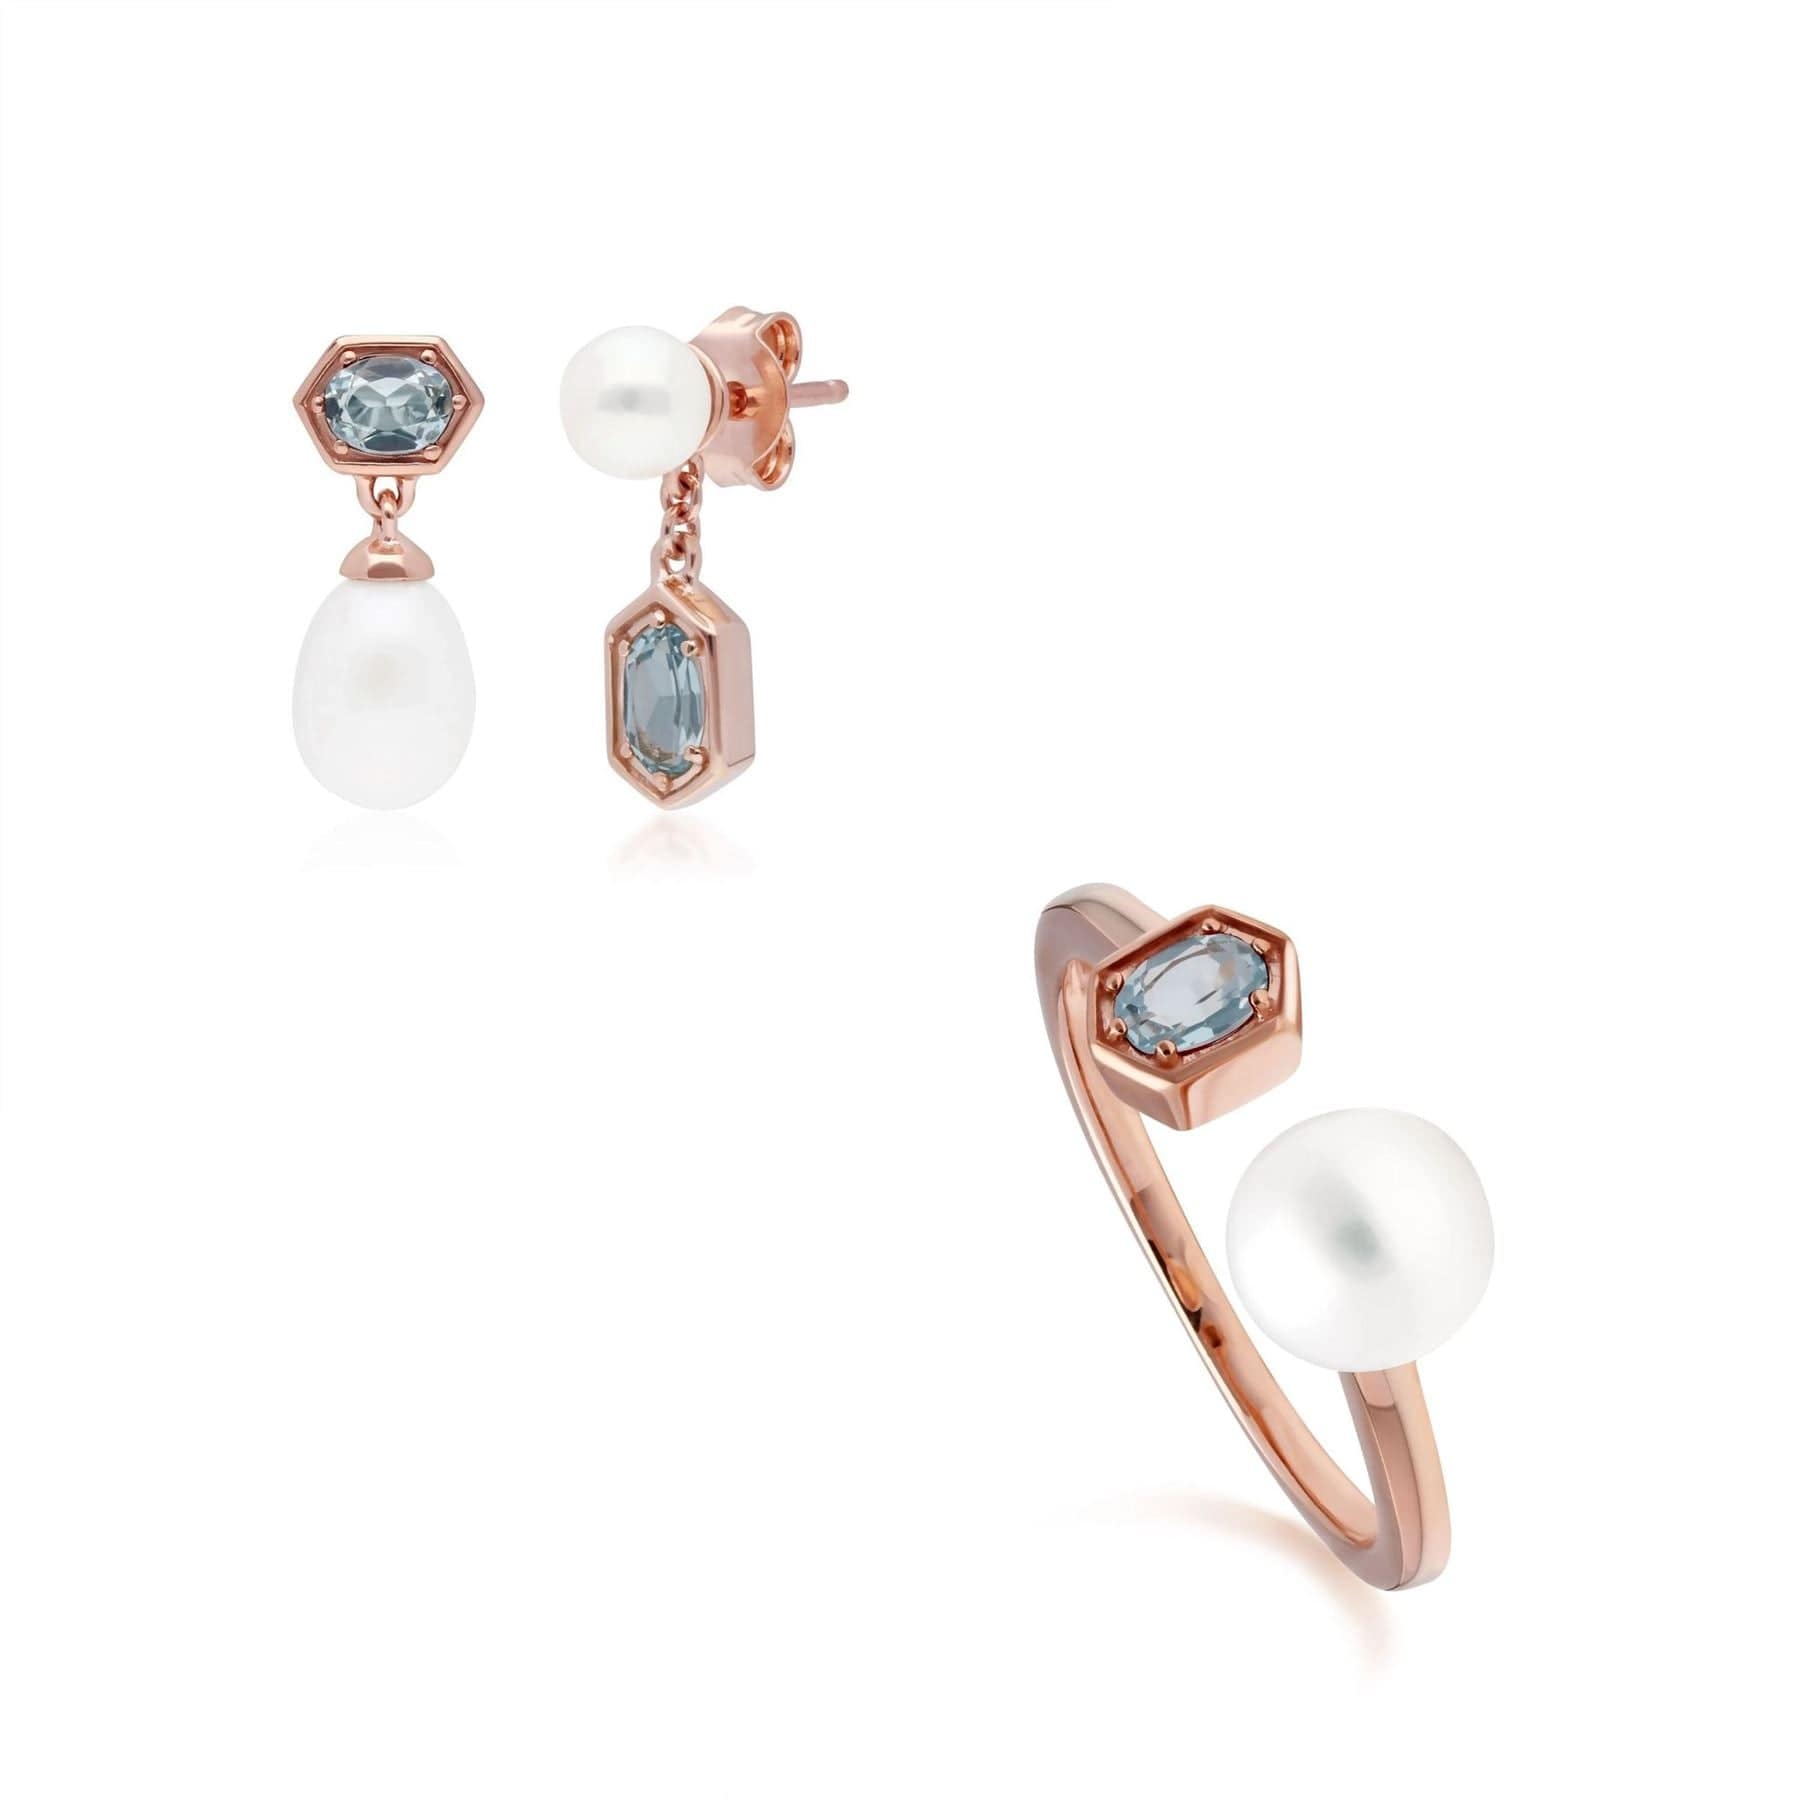 Modern Pearl & Blue Topaz Earring & Ring Set in Rose Gold Plated Silver - Gemondo